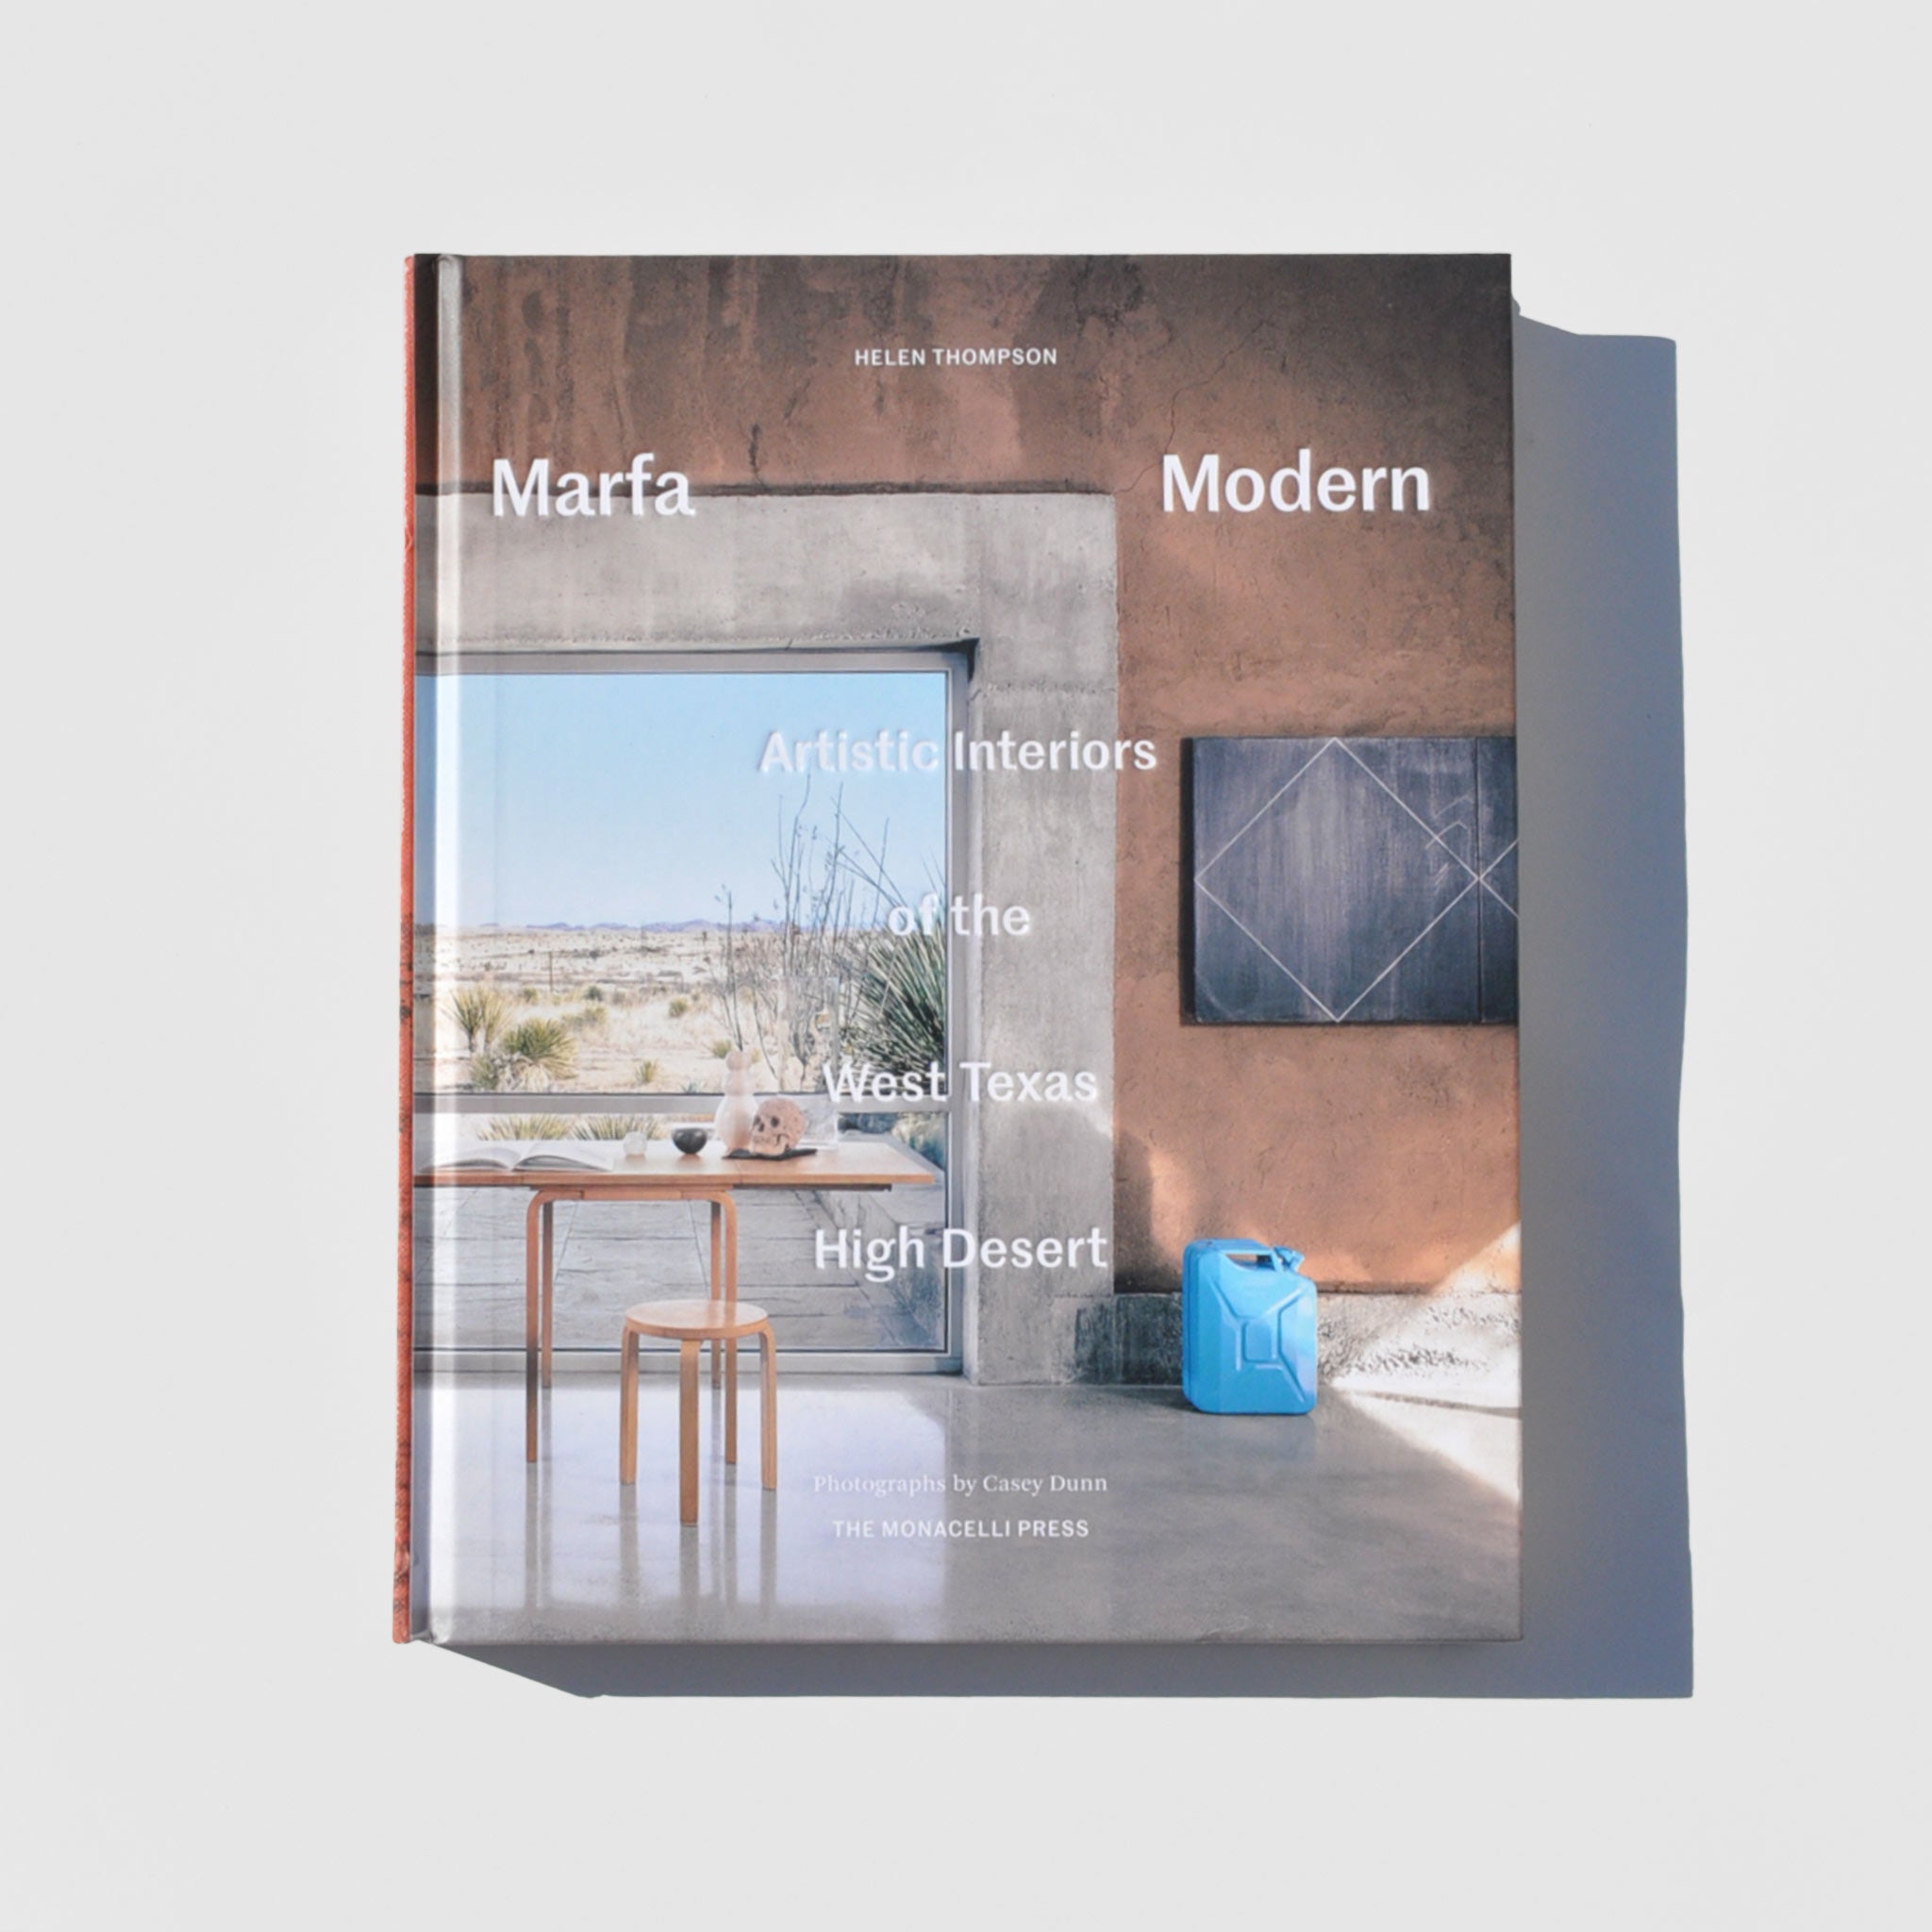 Flat image of the Marfa Modern book, artistic interiors of the West Texas high desert.